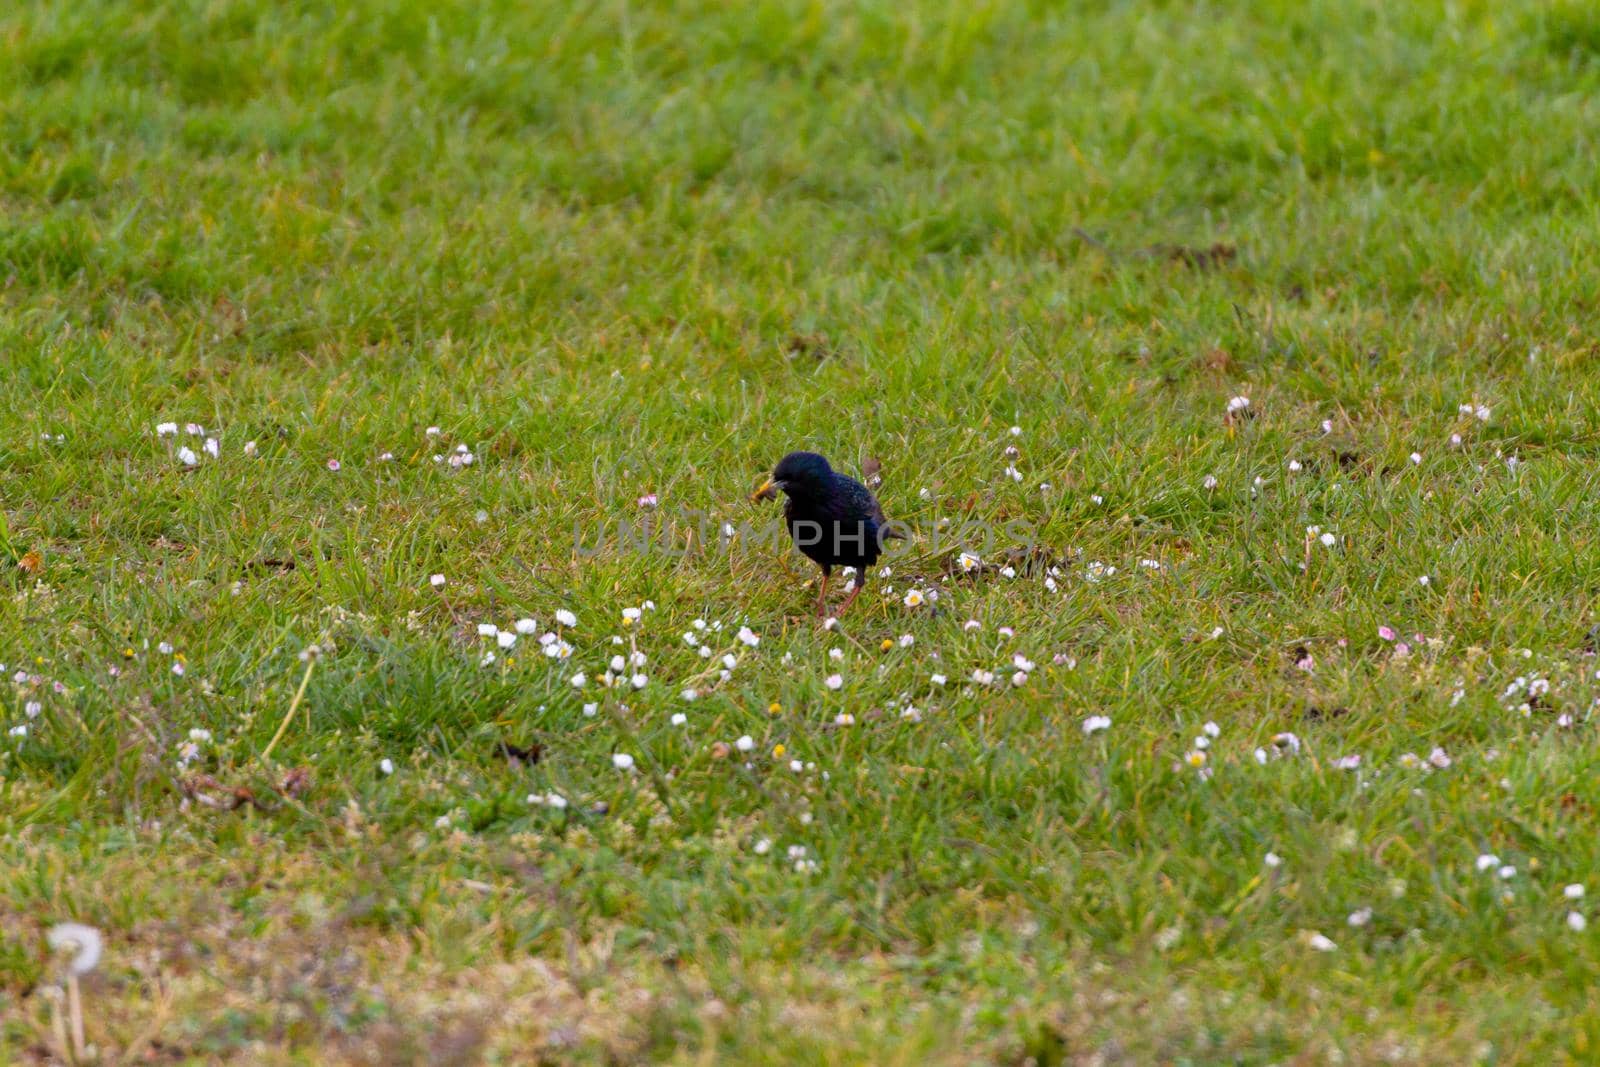 Close-up of a small blackbird standing in a green lawn with a worm in its beak